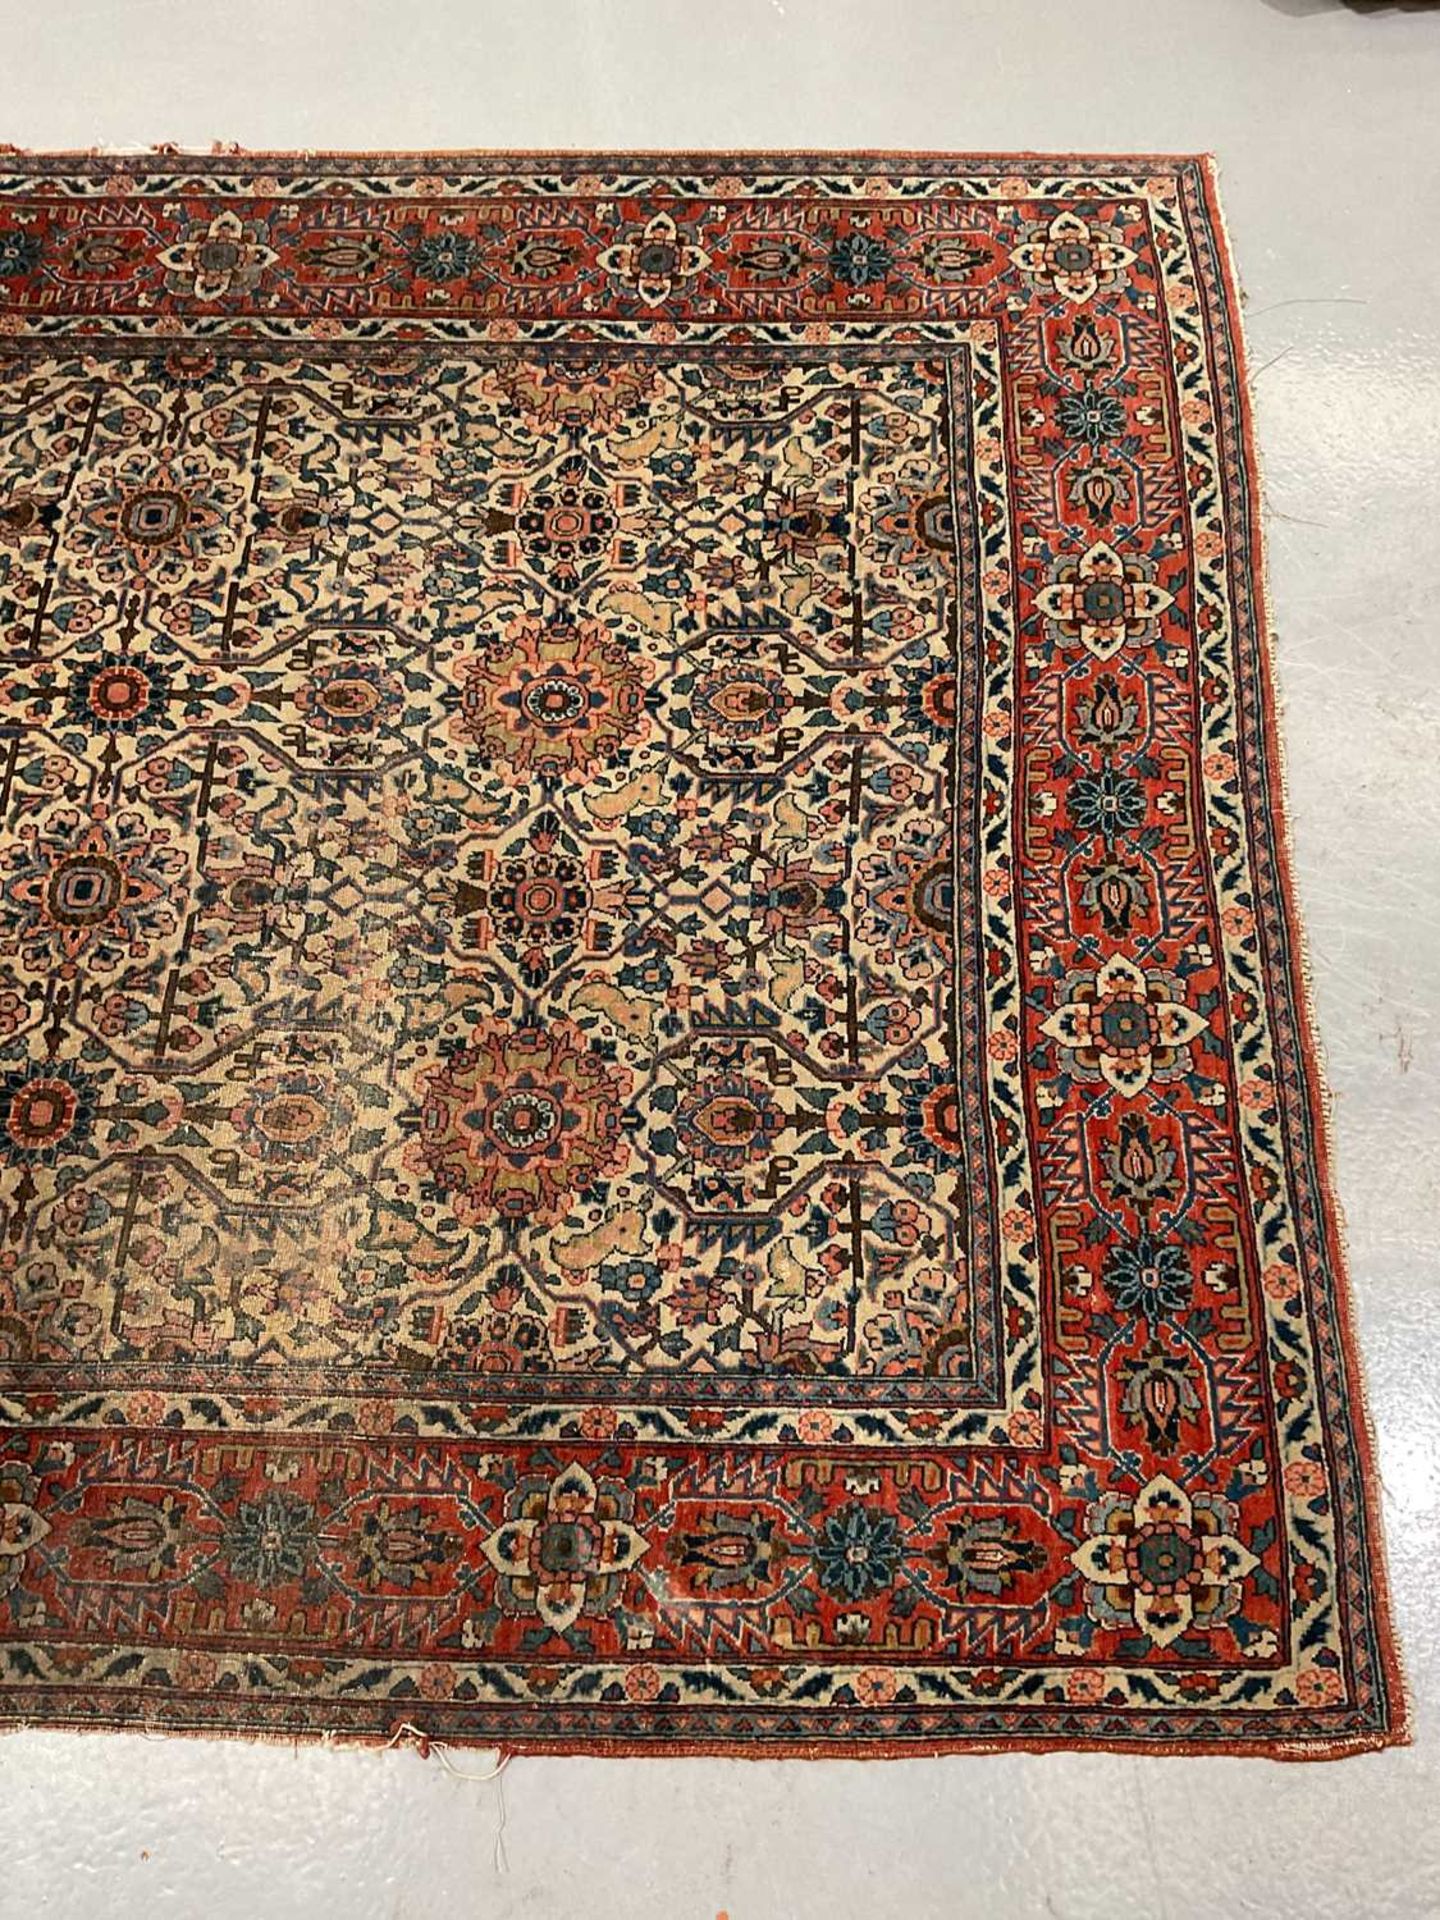 An antique ivory ground Kerman rug with an allover floral design within multiple borders 202 x 137cm - Image 5 of 10